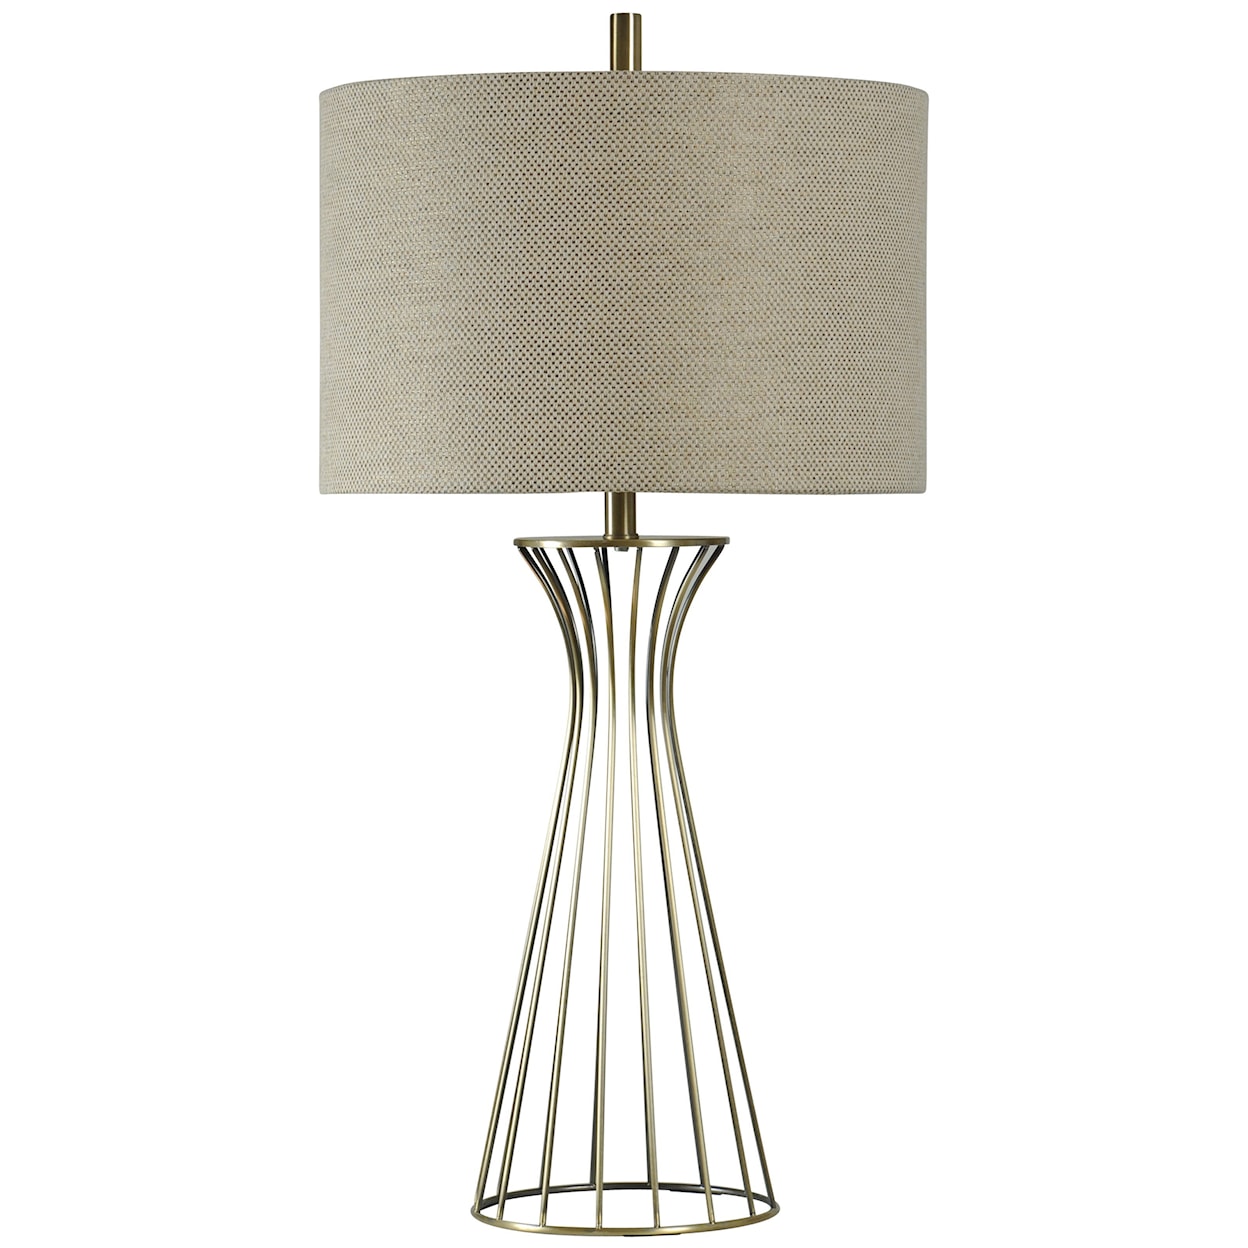 StyleCraft Lamps Classic Formed Metal Table Lamp